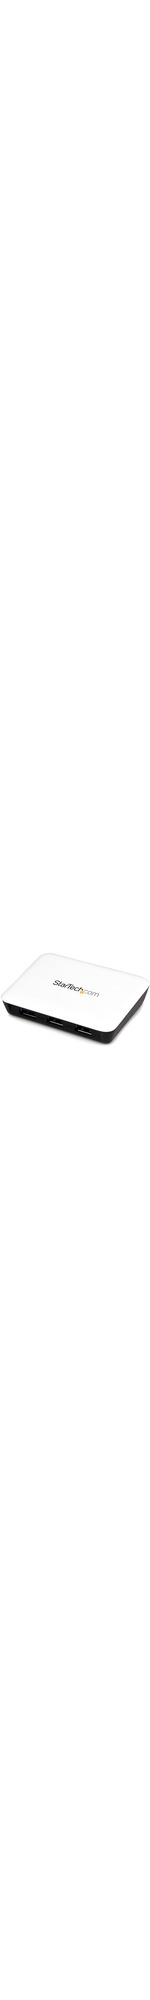 StarTech.com USB 3.0 to Gigabit Ethernet NIC Network Adapter with 3 Port Hub - White - 3 Total USB Ports